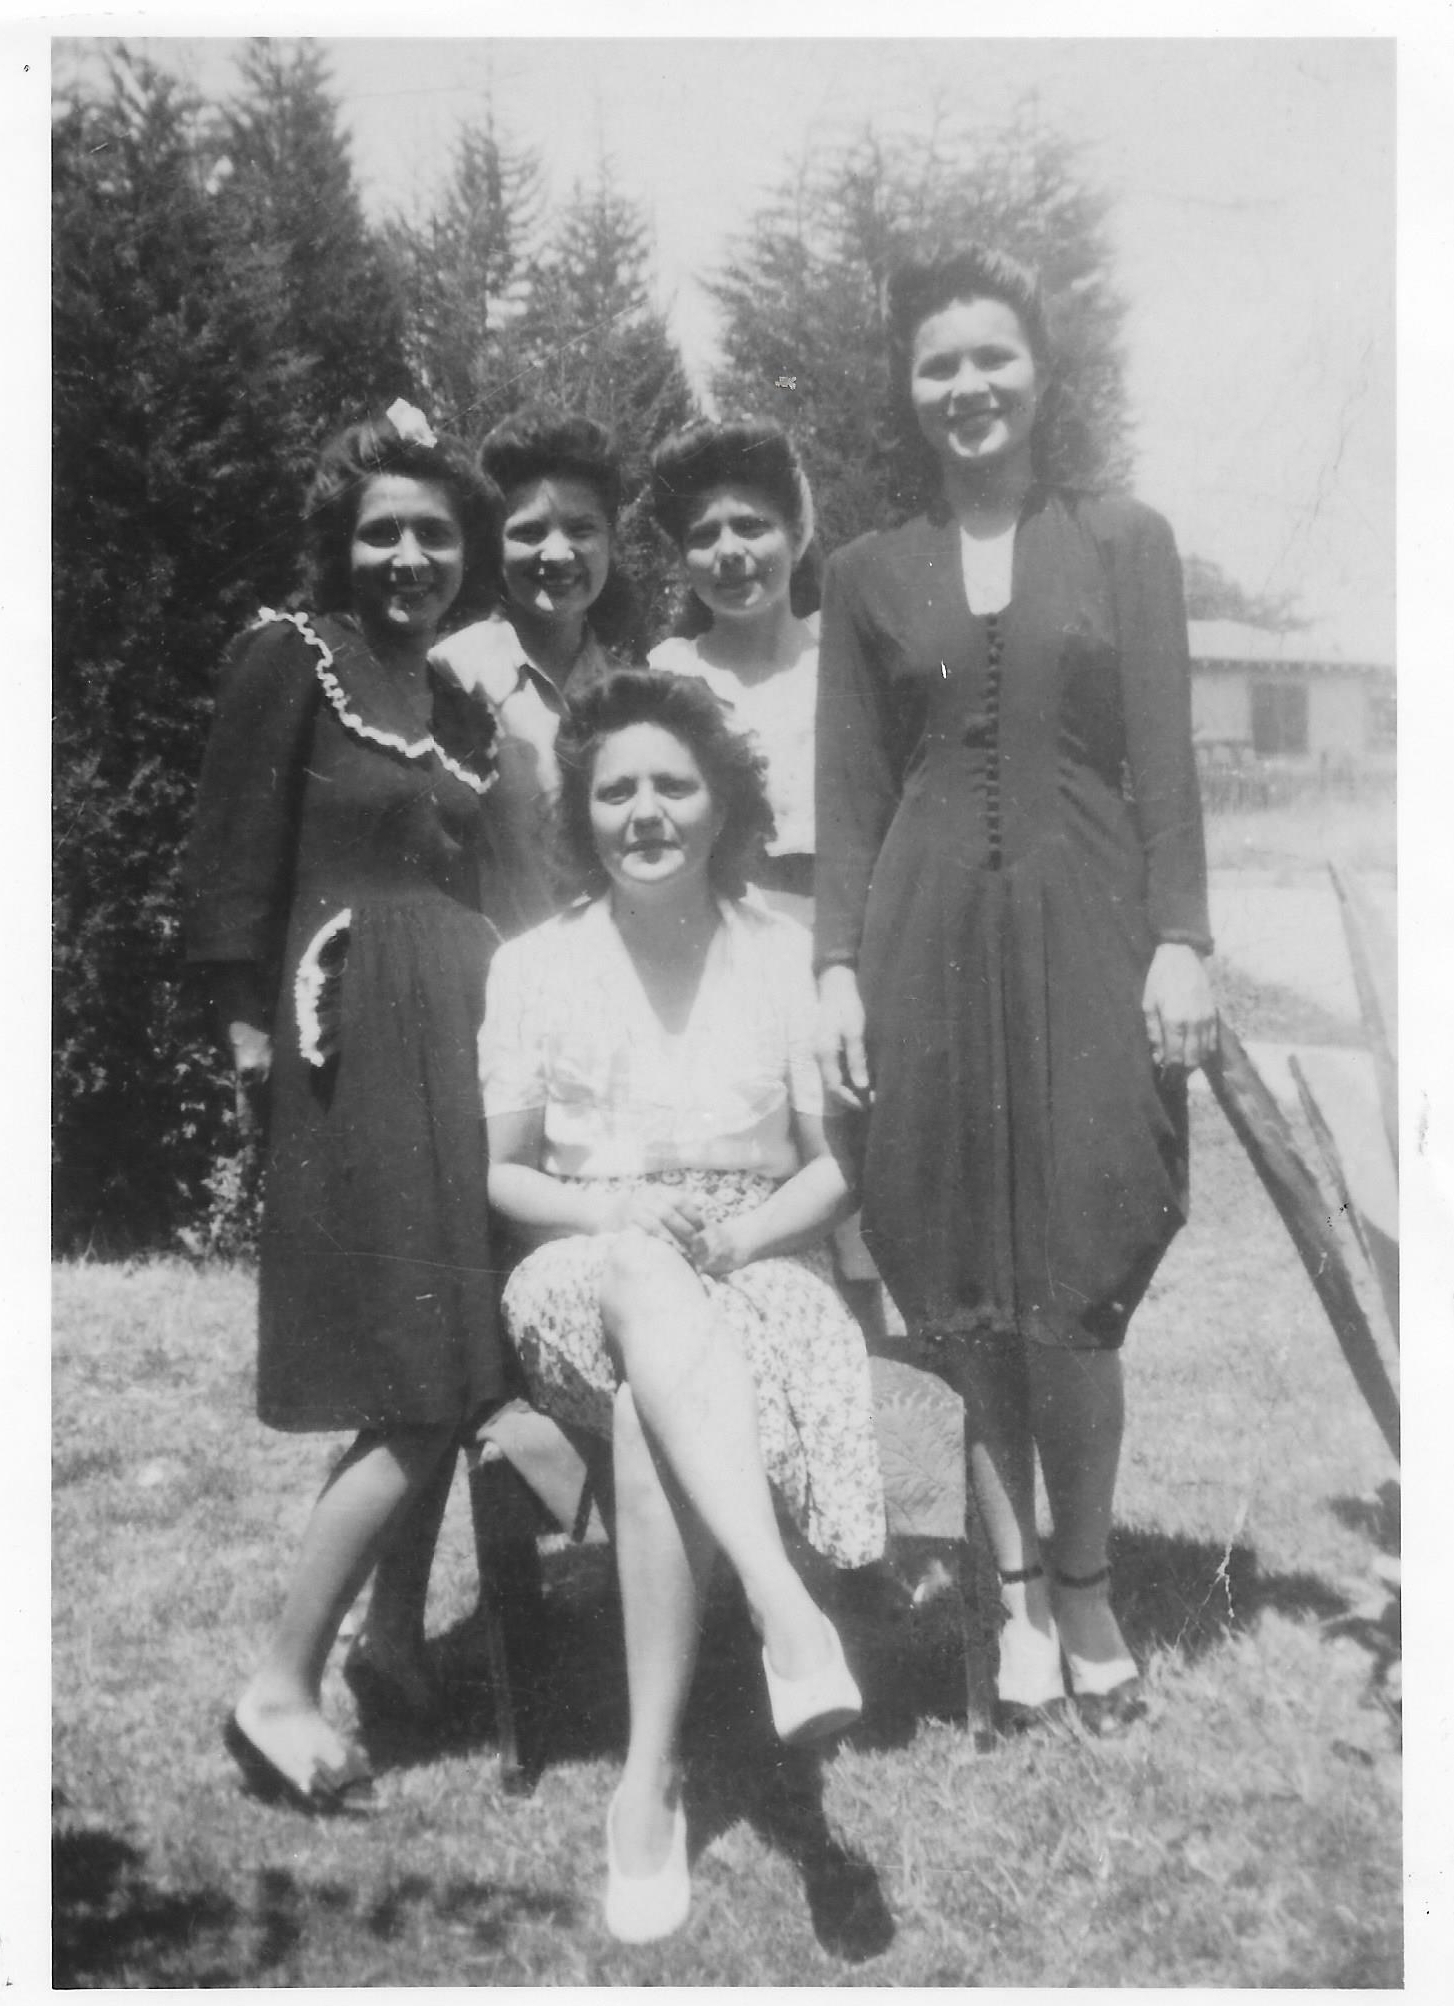 The Gutierrez sisters in the 1940's